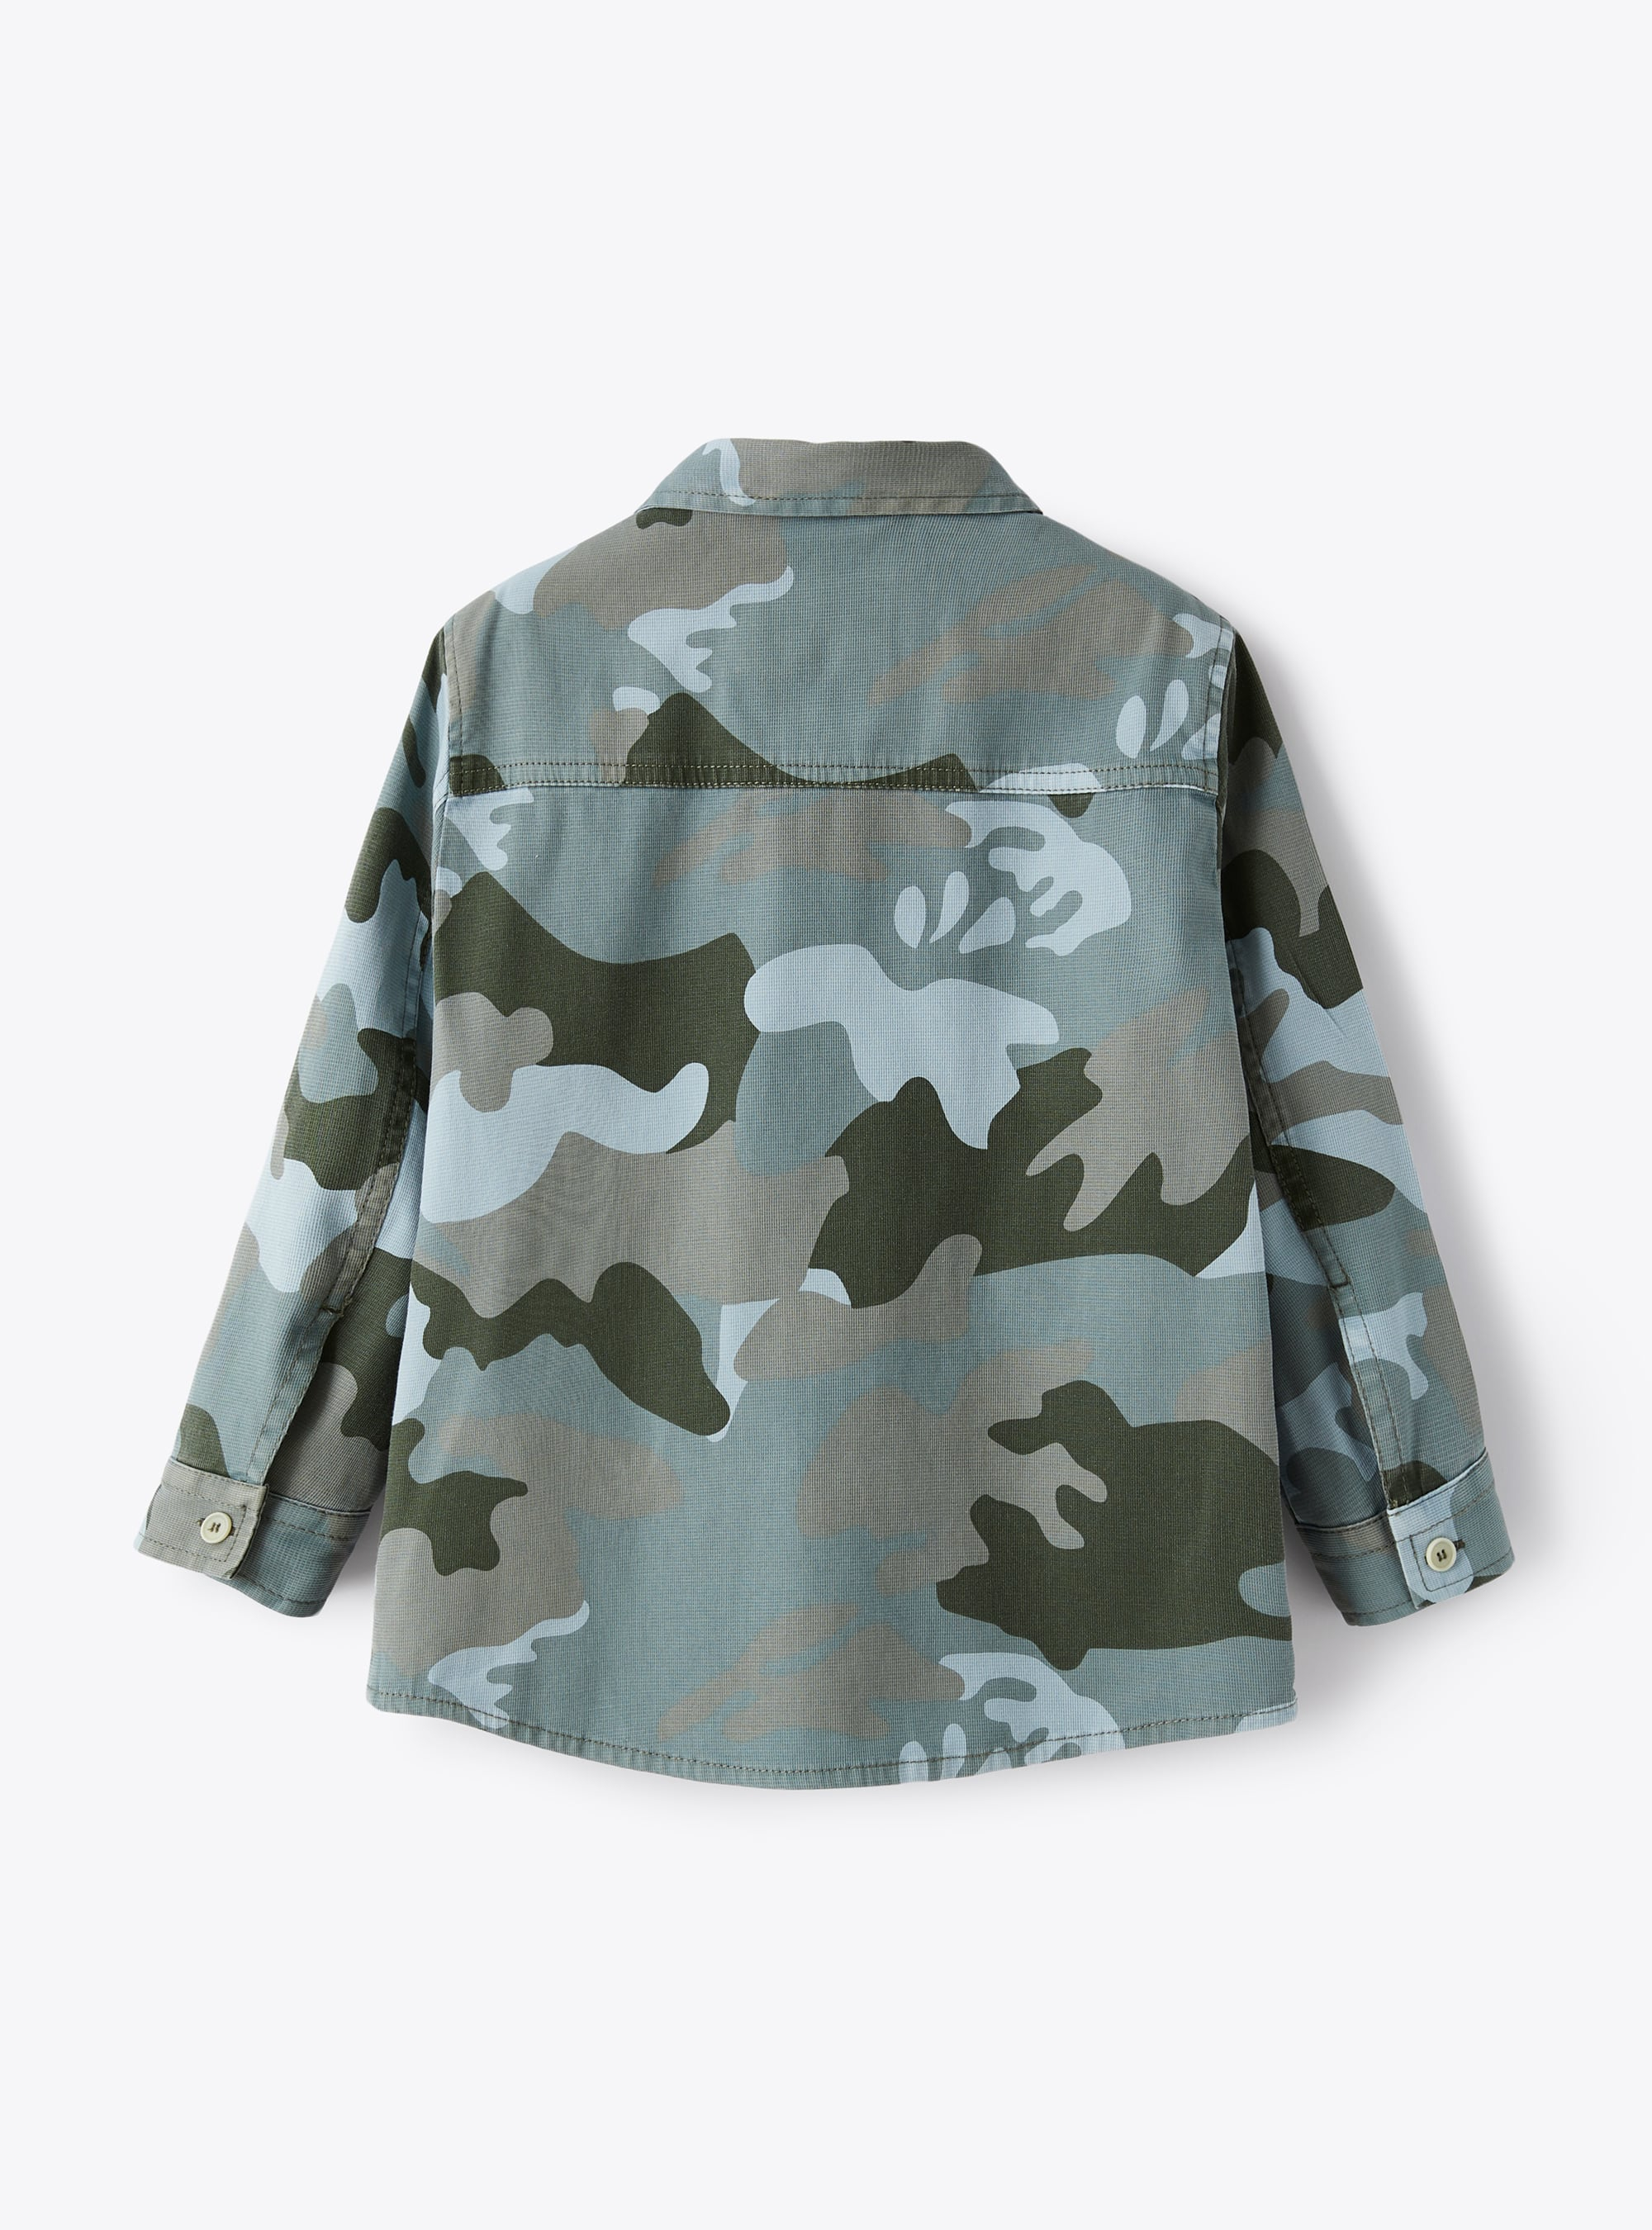 Shirt jacket in a camouflage pattern - Light blue | Il Gufo